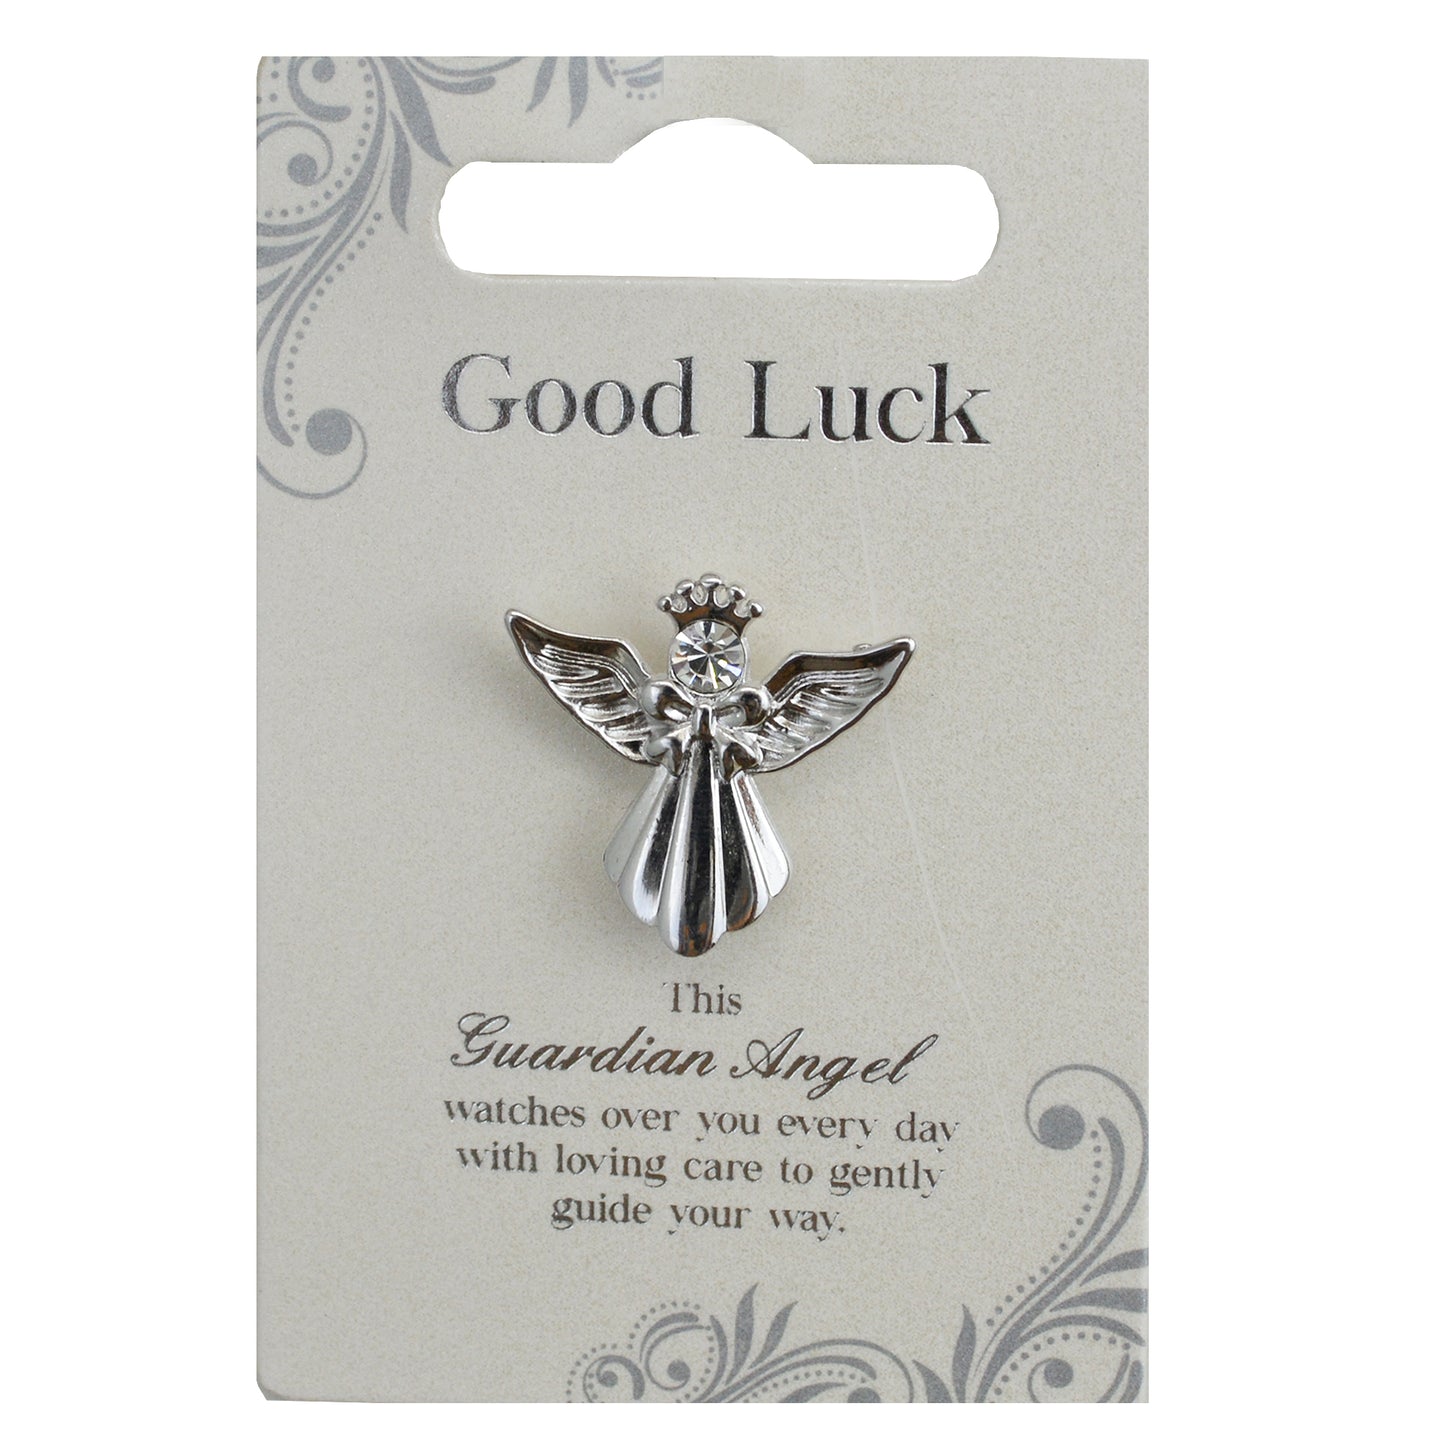 Good Luck Silver Coloured Angel Pin With Gem Stone